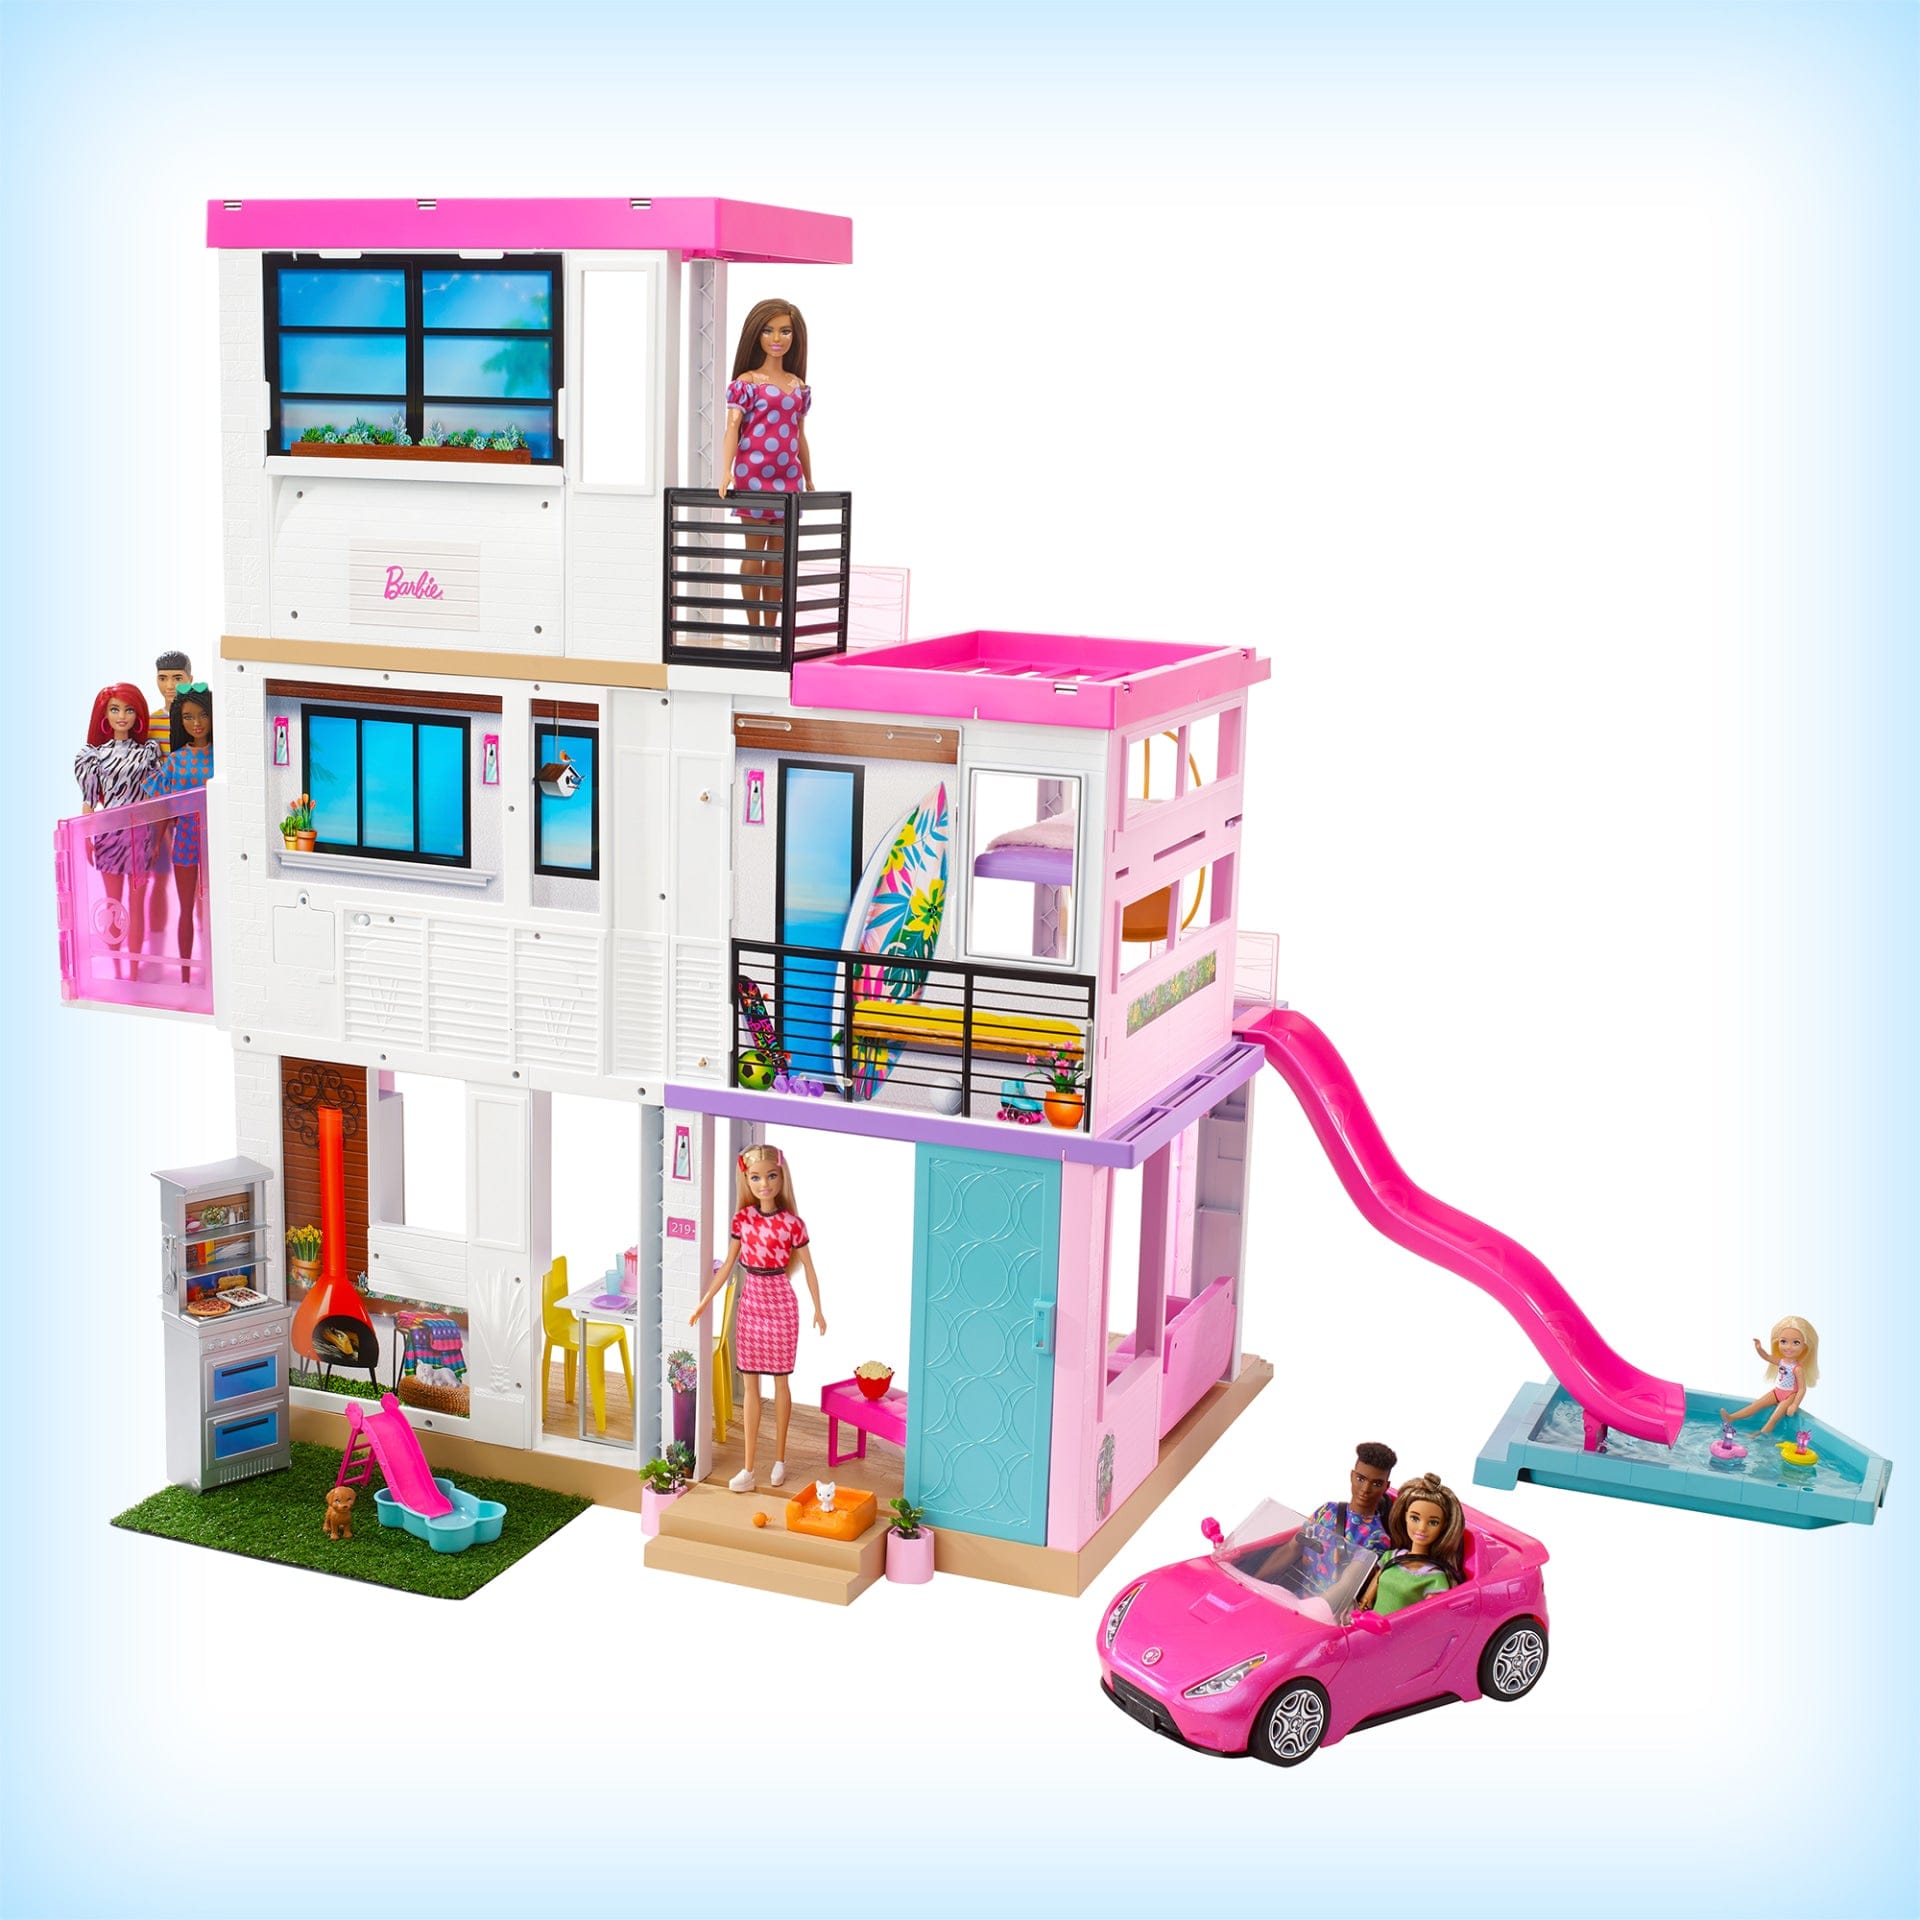 MATTEL Barbie Dreamhouse: 360-Degree Play Inspires Playtime All Day! There are so many stories to tell with 3 floors, 8 rooms and 70+ accessories - GNH53